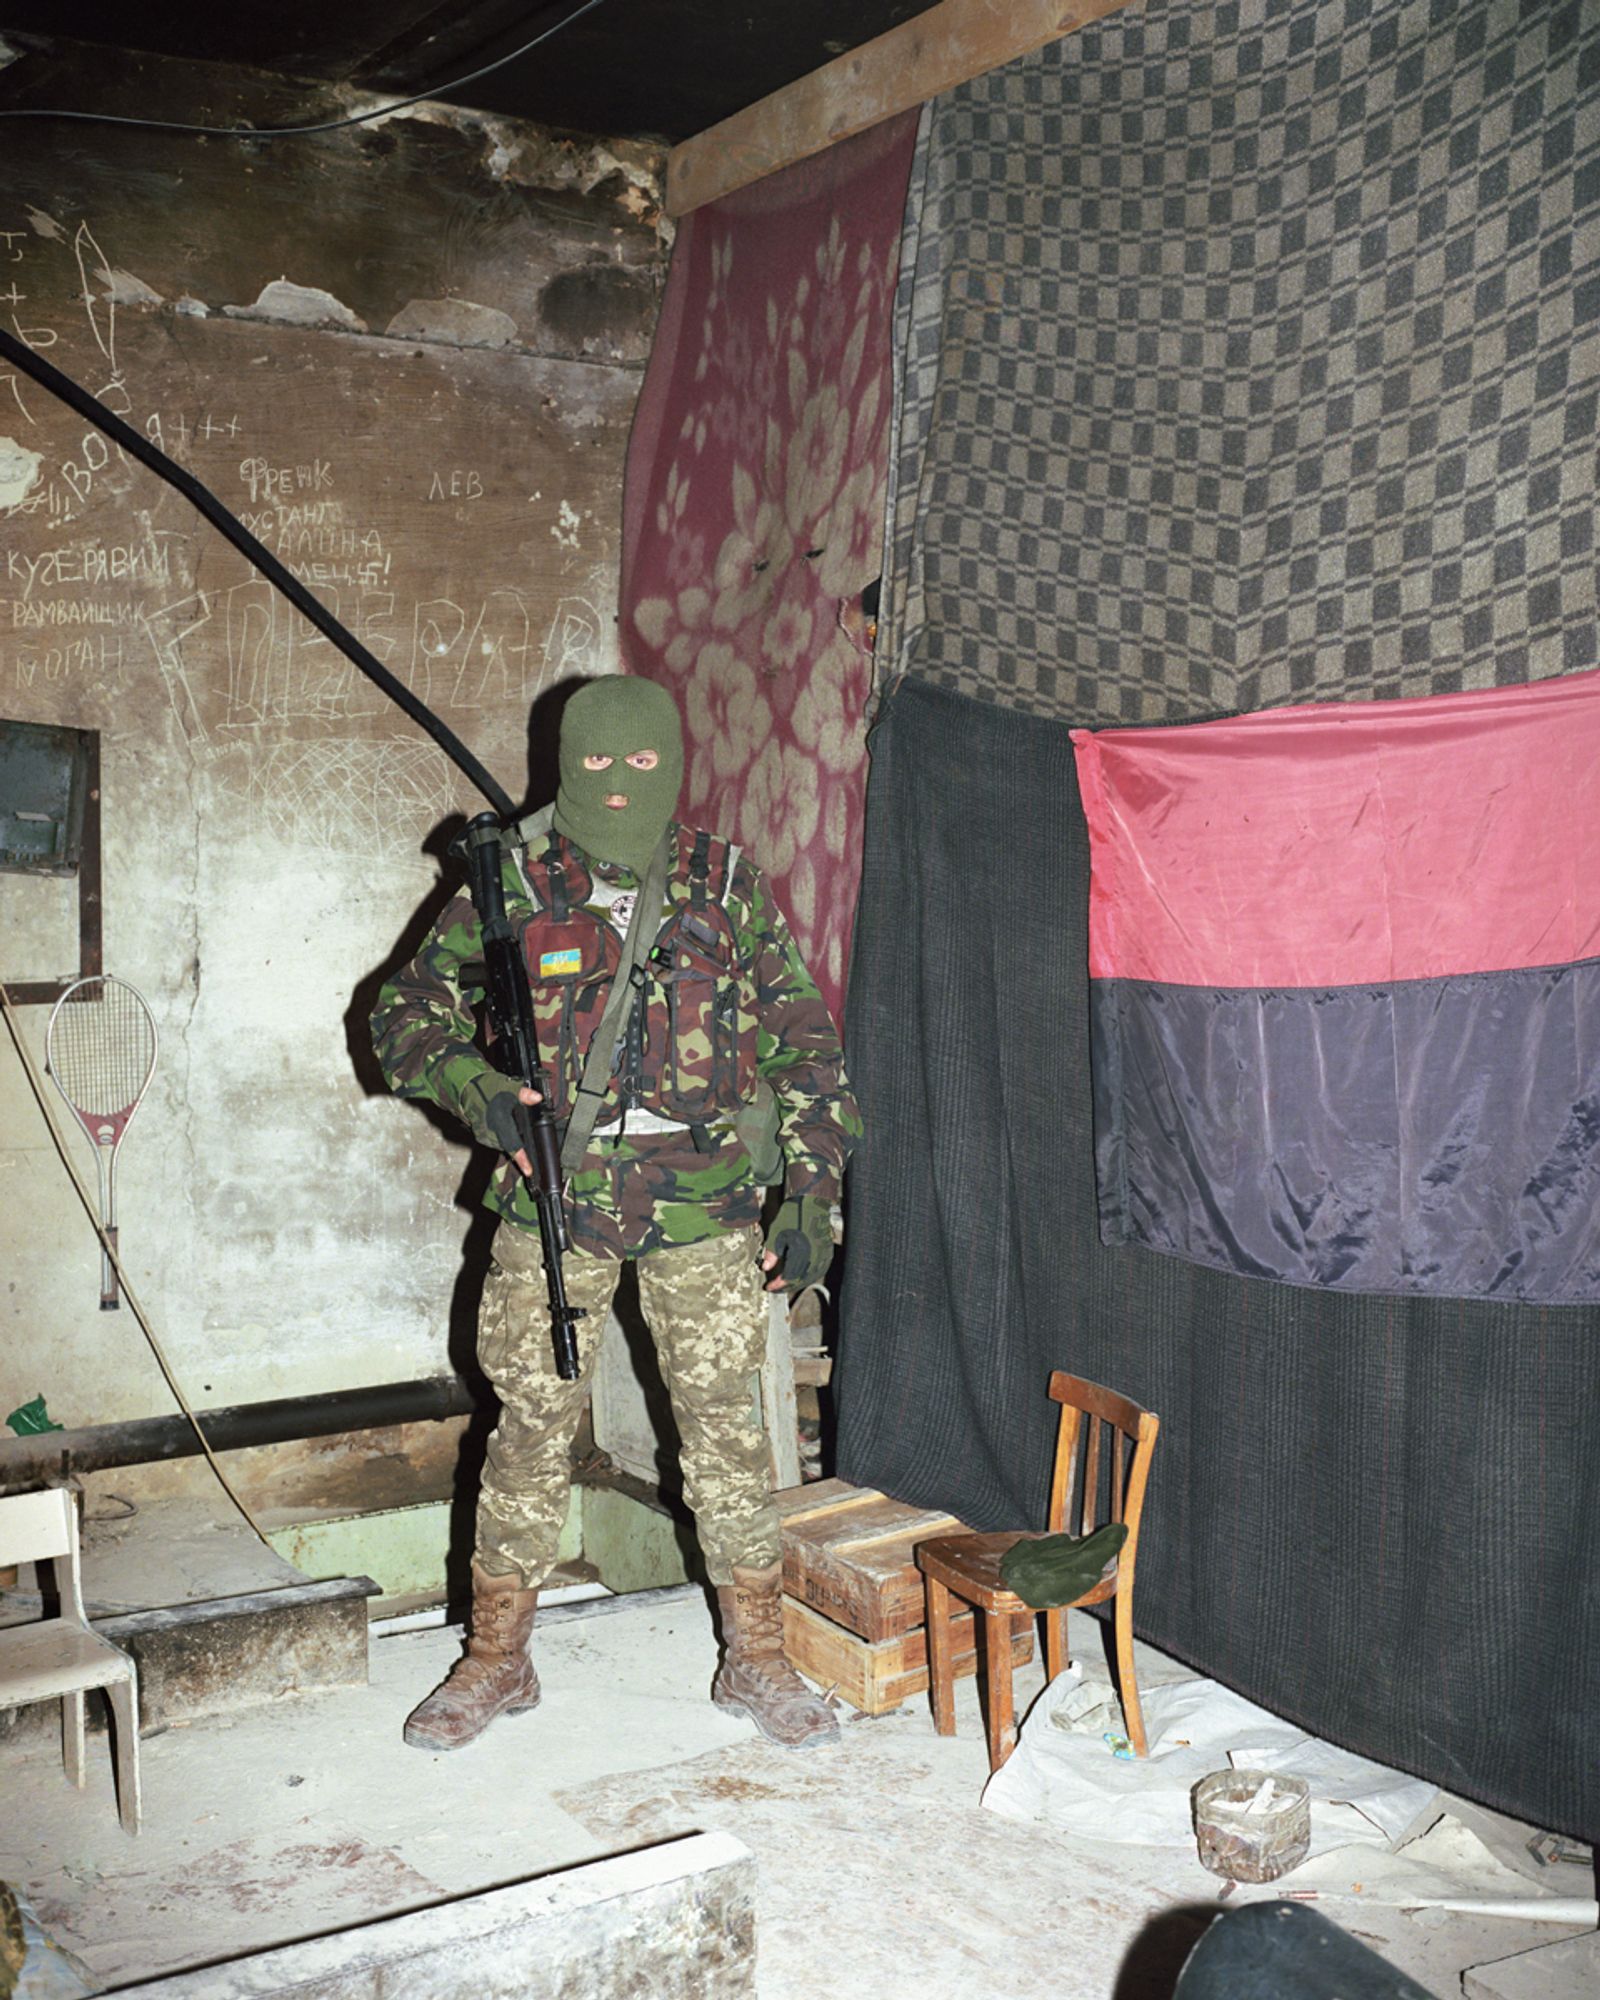 Secret Lives in the Shadows of the Ukrainian Conflict